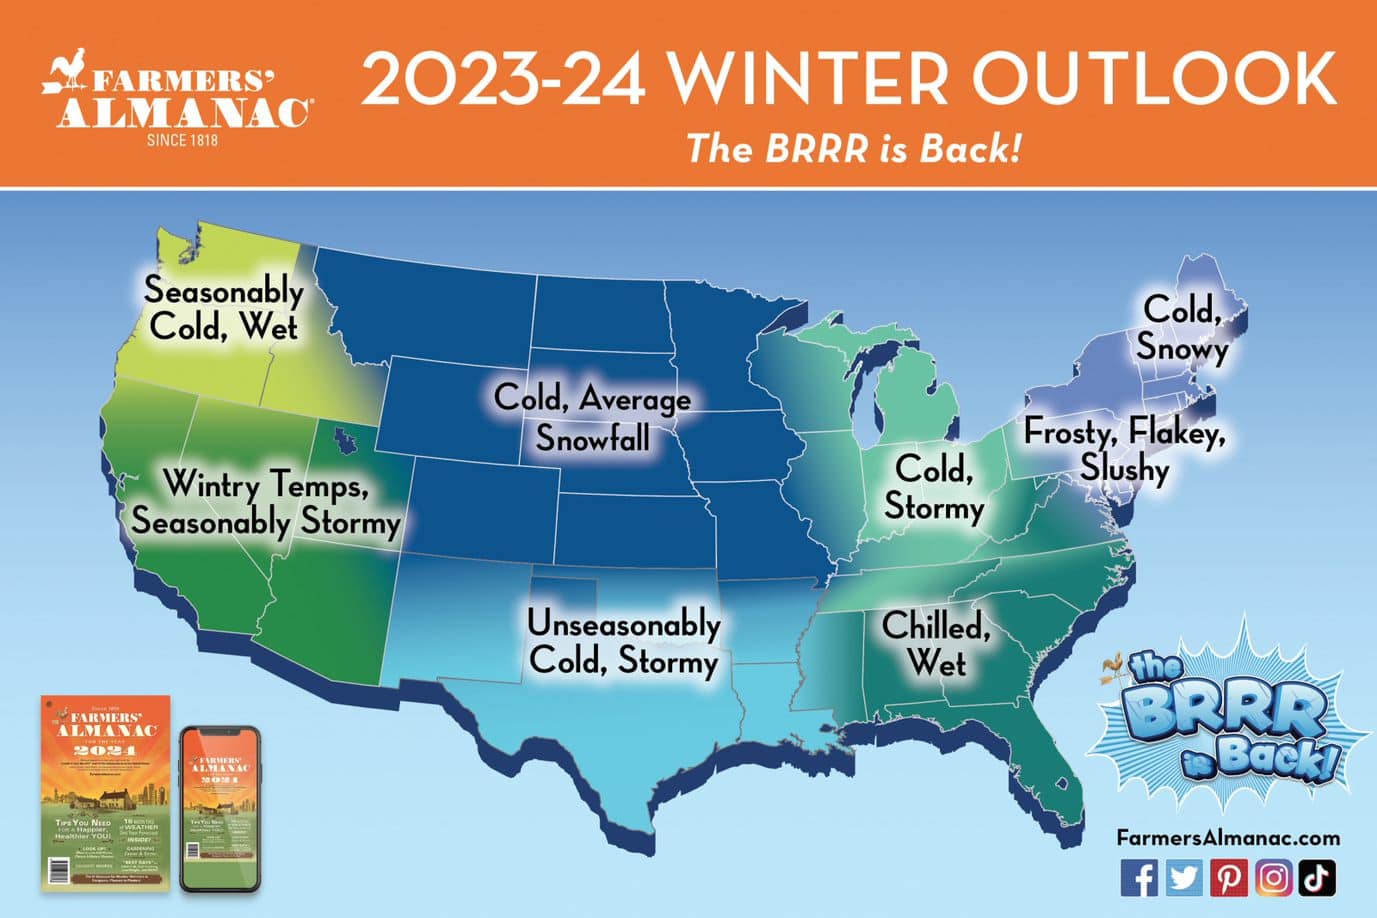 Both farmers' almanacs have announced their winter weather predictions